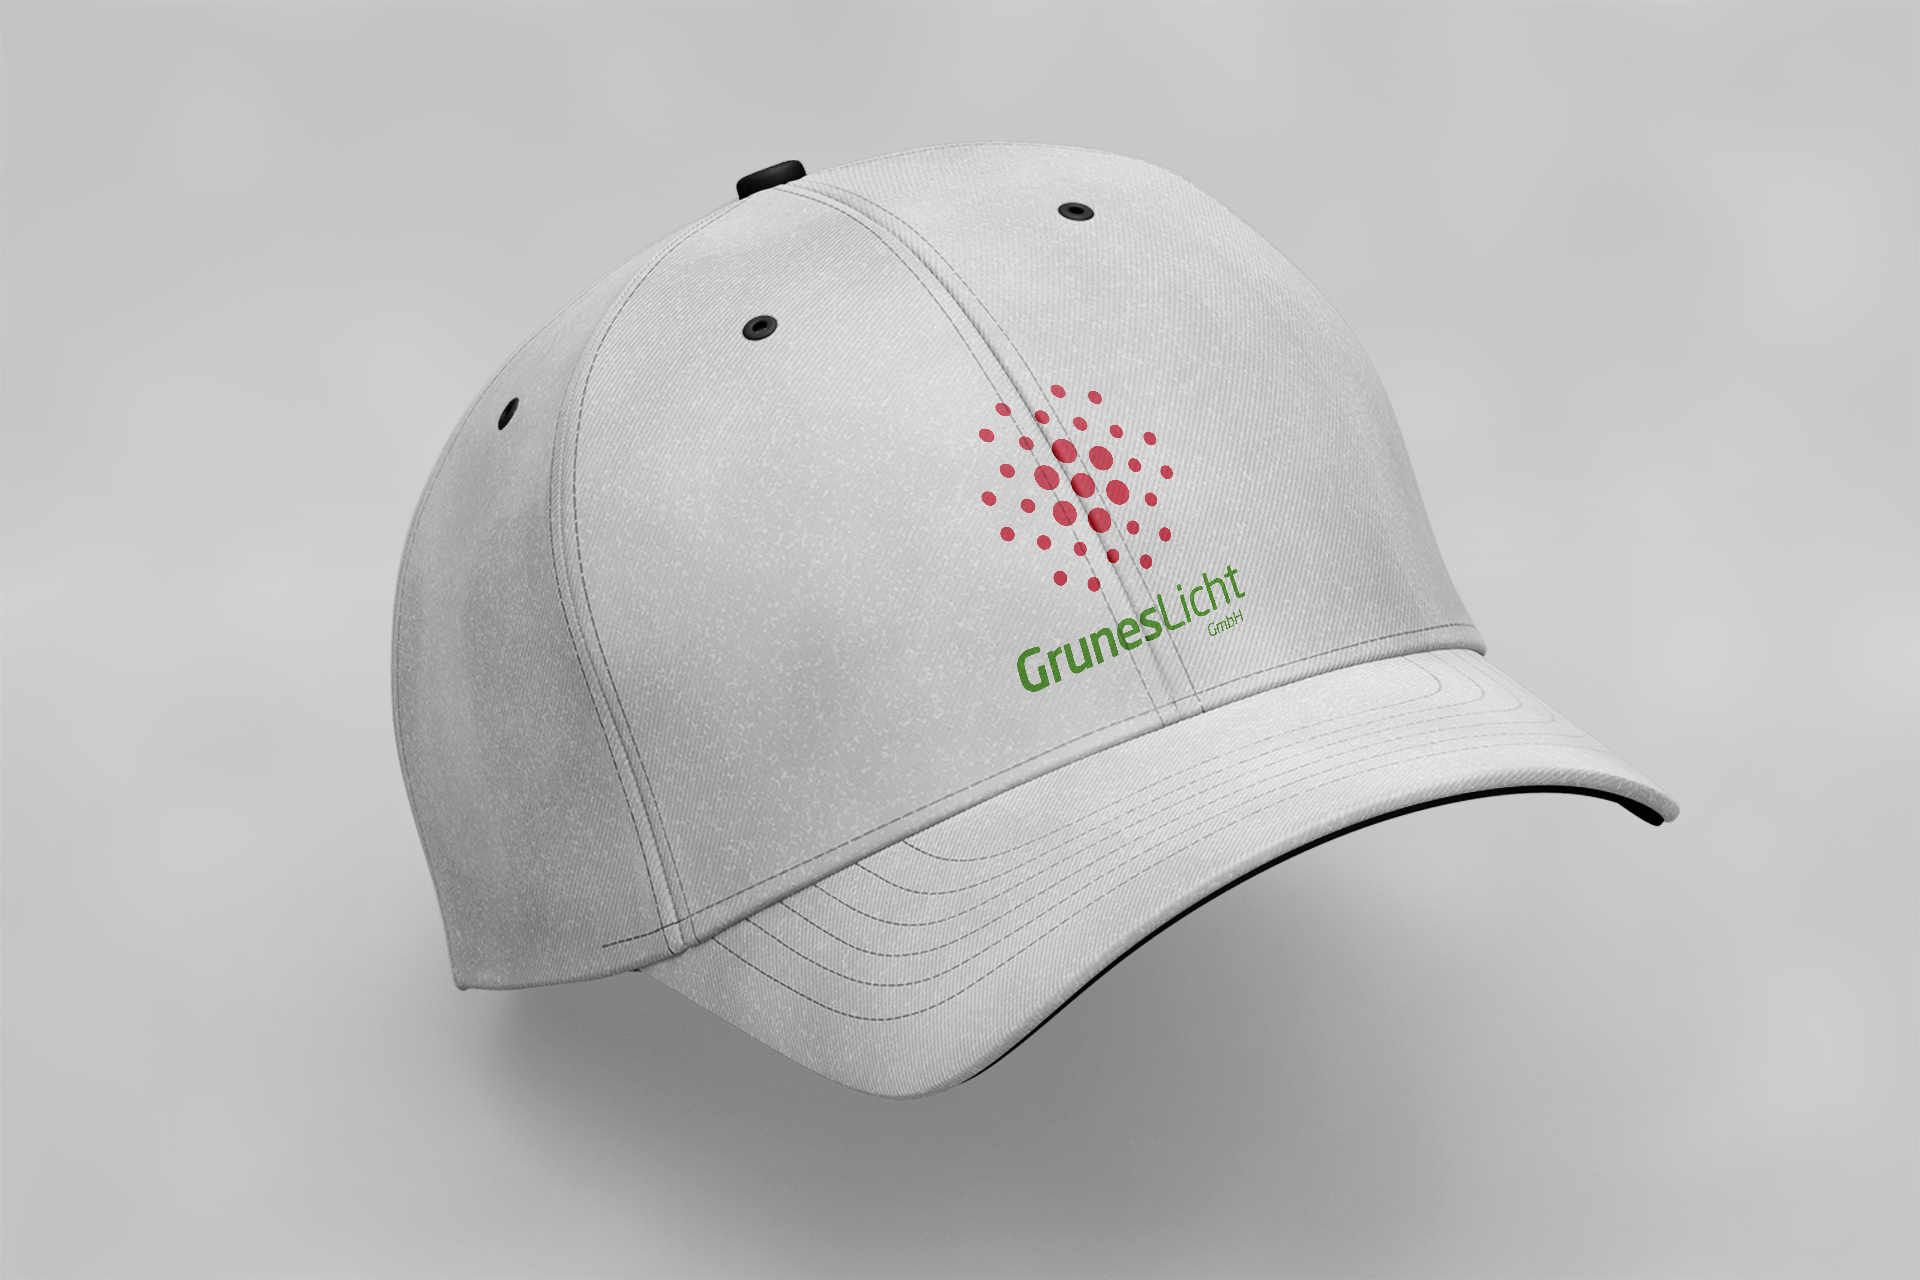 Logo Design Mockup Idea| Typography| Red dots| White hats| Personalized Solutions| Online Company| UAE| Get Solutions